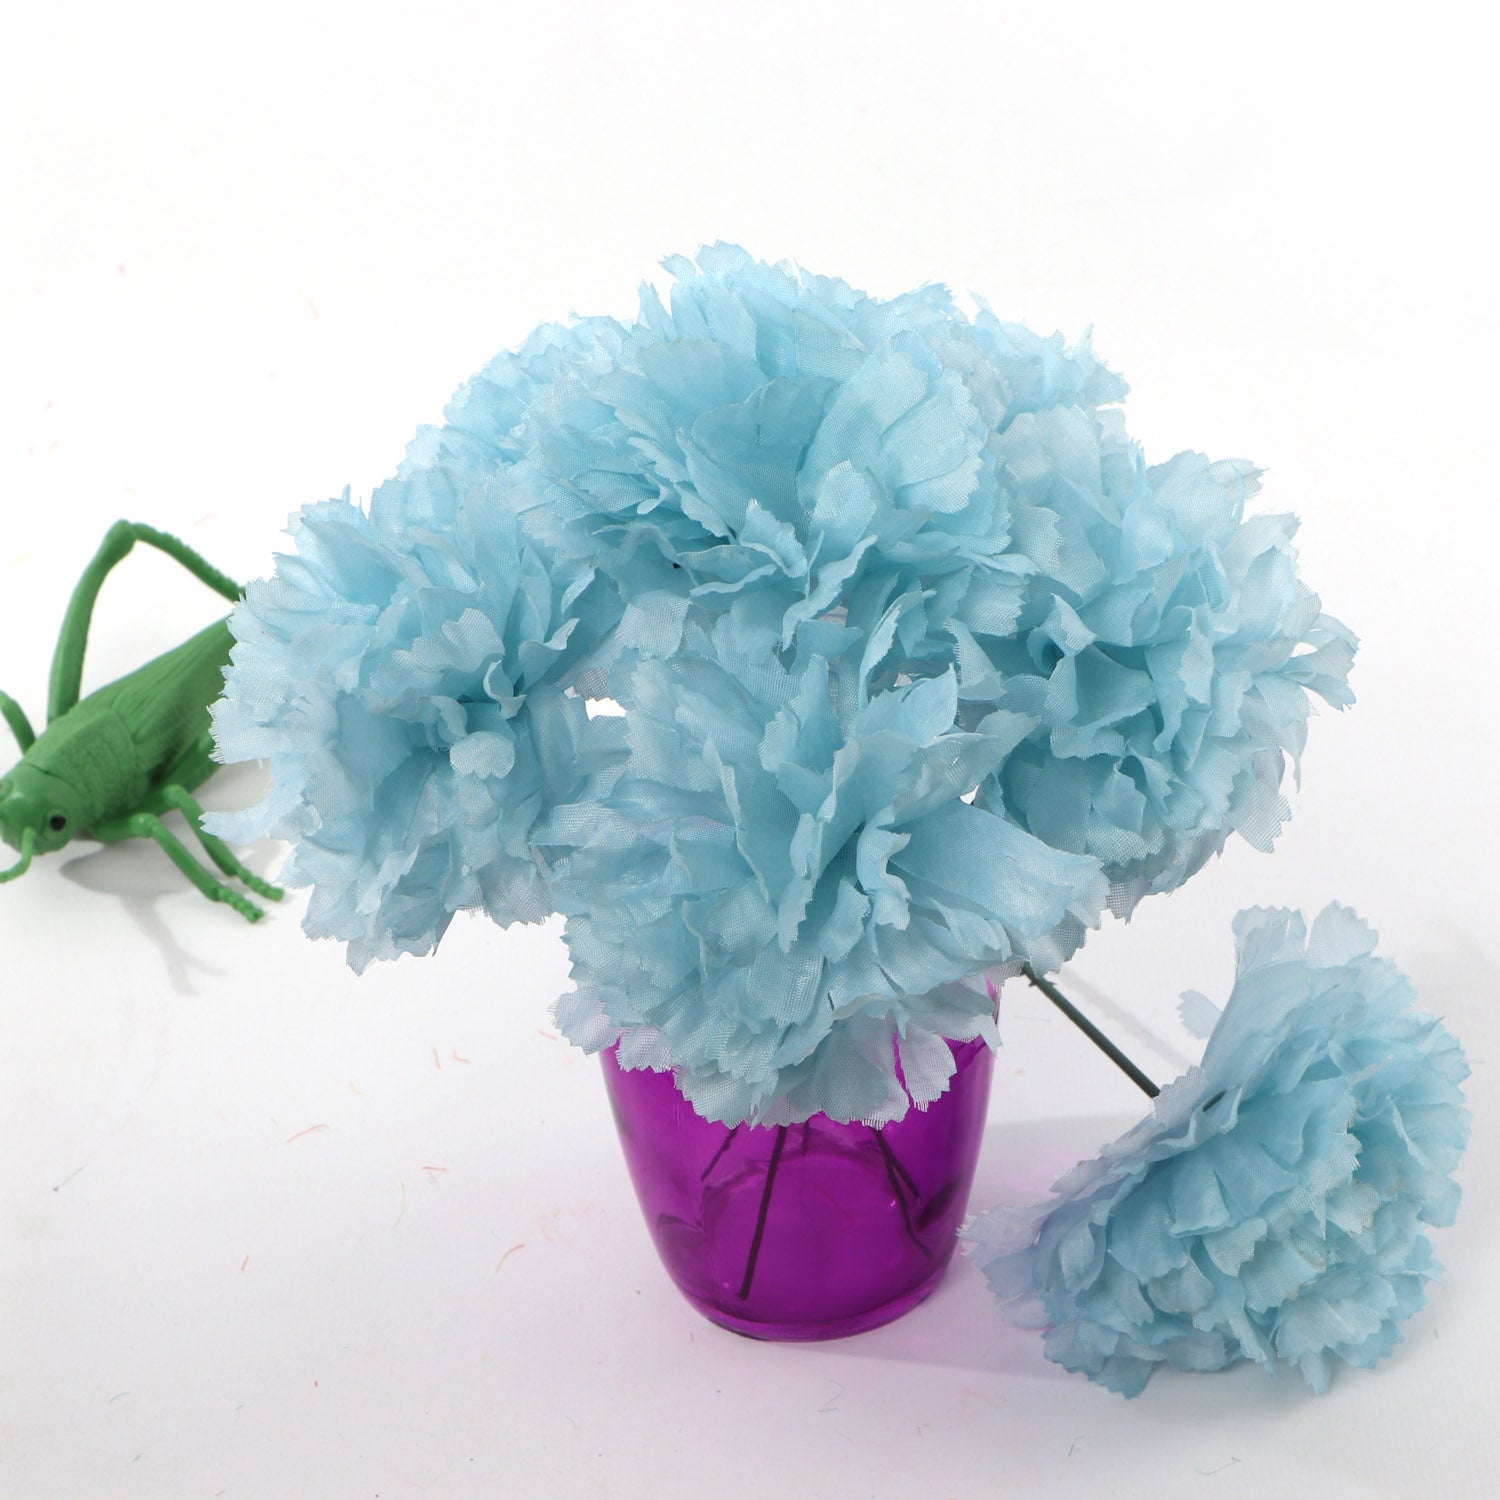 Artificial Silk Carnation Picks with 5" Flower Heads & 5" Stems (100 Box Pack)